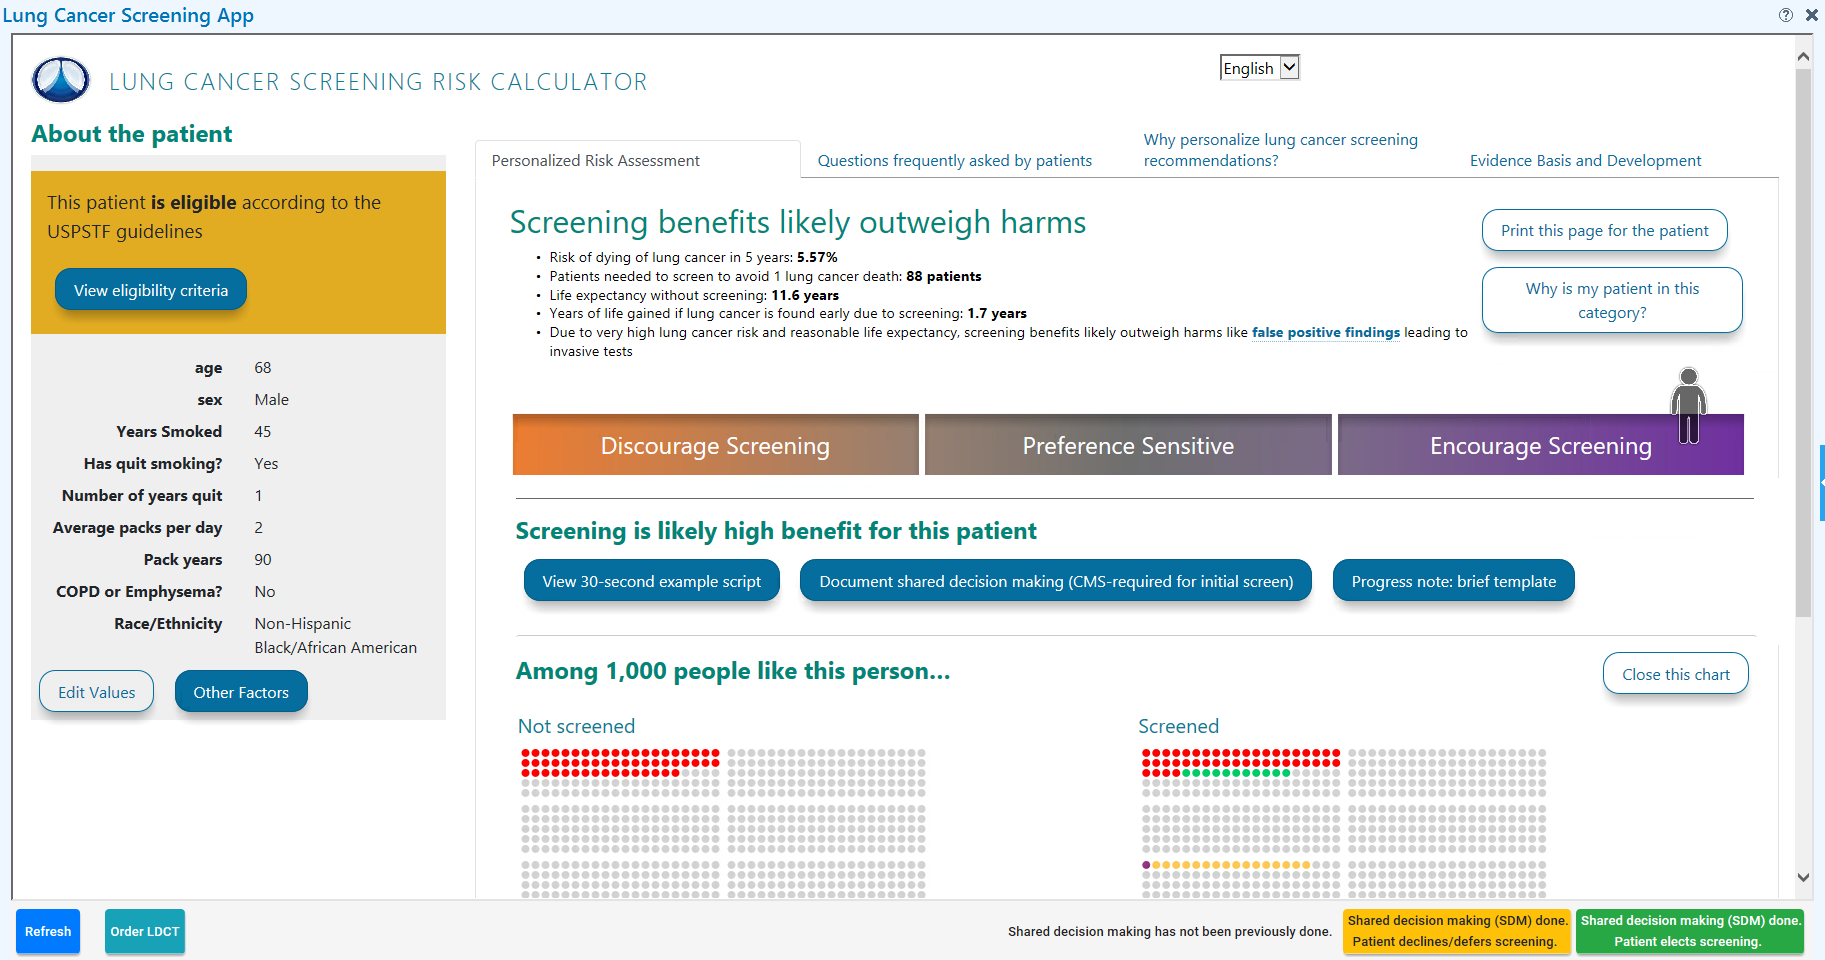 Screenshot of a digital tool that integrates patient electronic health records into a personalized risk assessment, visually summarized by a risk spectrum and colored dots representing the likelihood of different health outcomes.